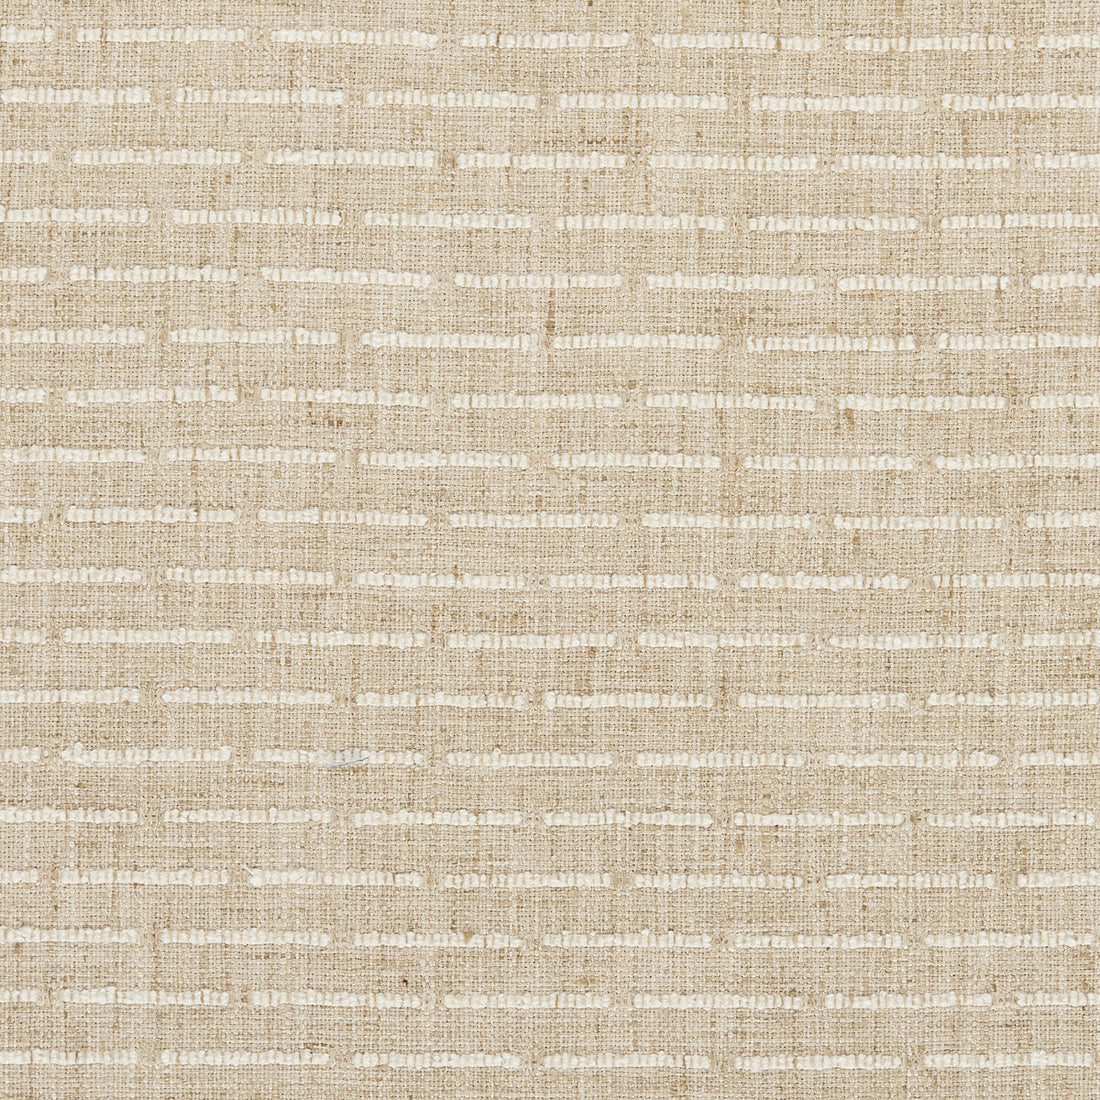 Kravet Basics fabric in 36528-161 color - pattern 36528.161.0 - by Kravet Basics in the Bungalow Chic II collection